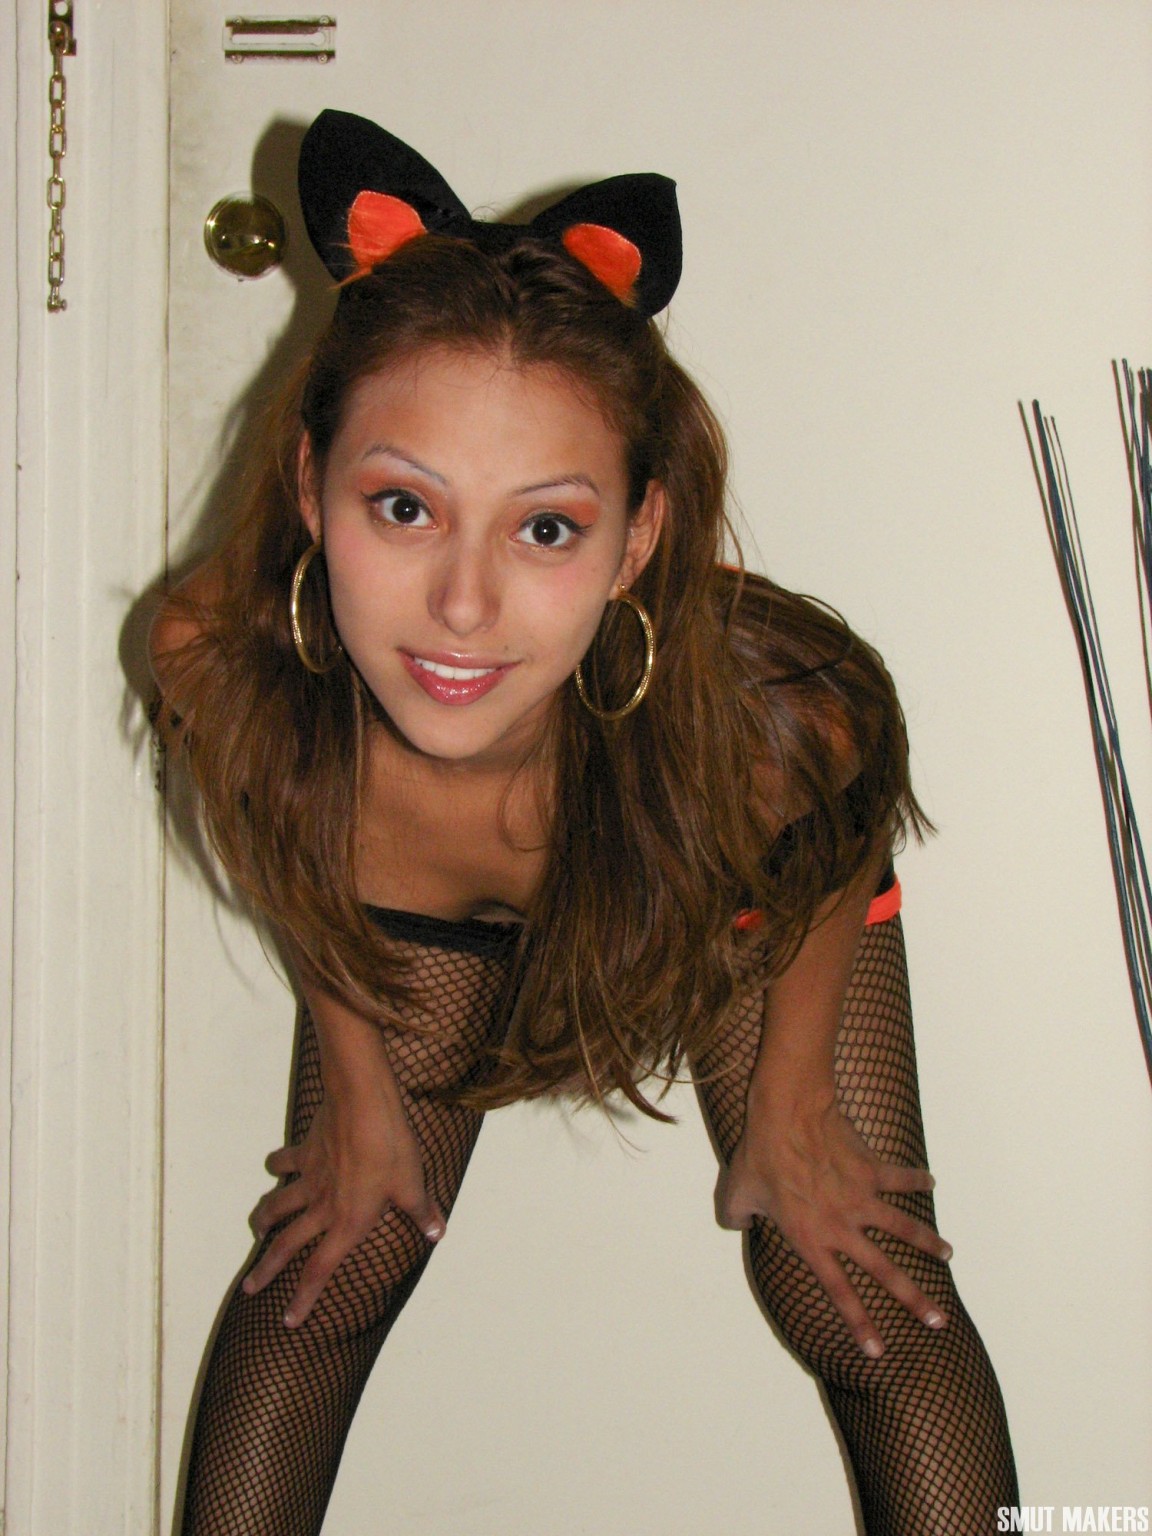 Latina teen is ready for Halloween in her cute Kitty costume #67947530